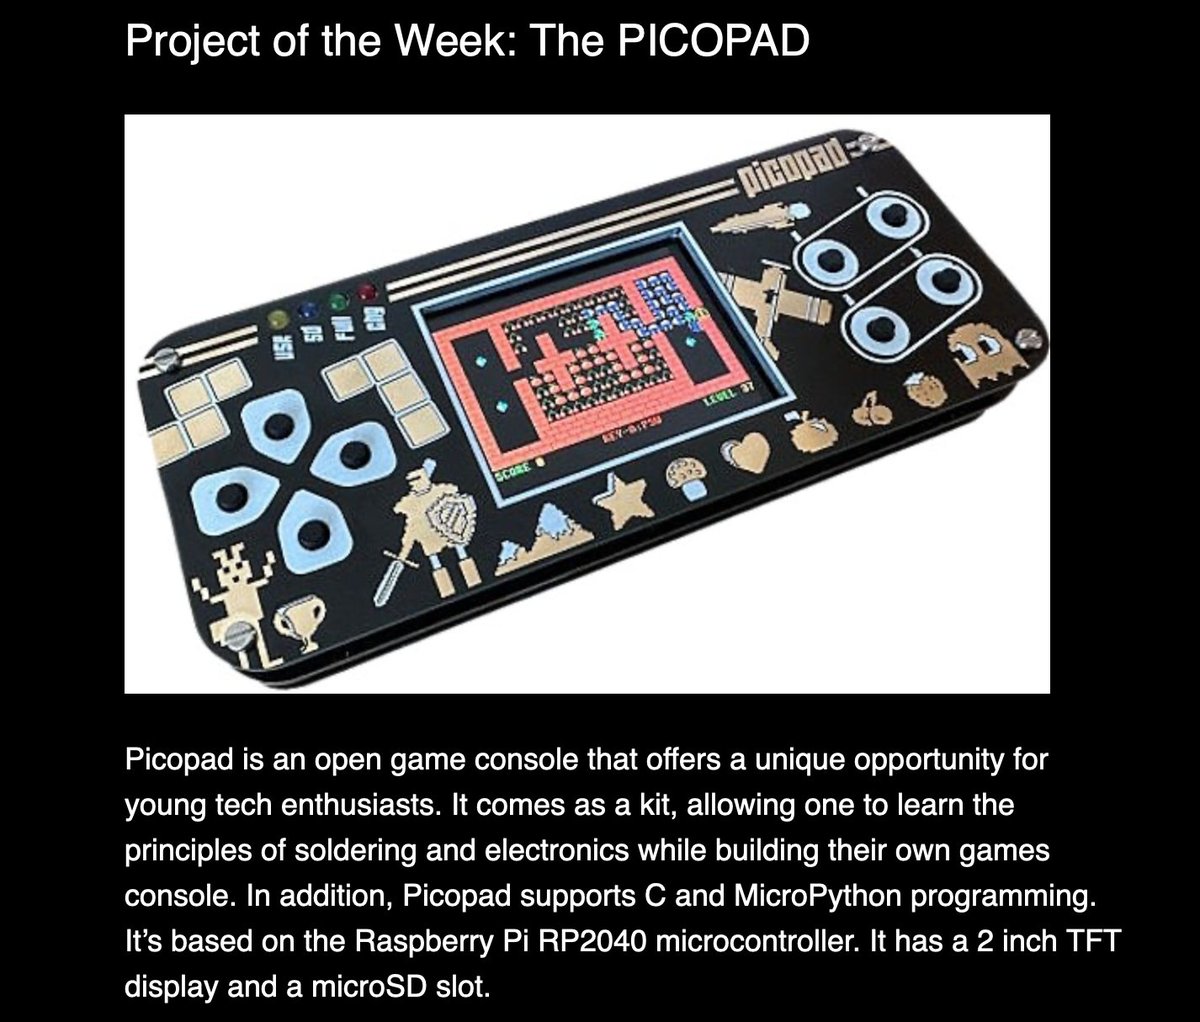 Proud moment for us! Our Picopad got a shoutout in the latest edition of the Python on Microcontrollers newsletter by Adafruit Daily.

adafruitdaily.com/2023/06/27/pyt…

#picopad #adafruit #adafruitdaily #ProjectOfTheWeek